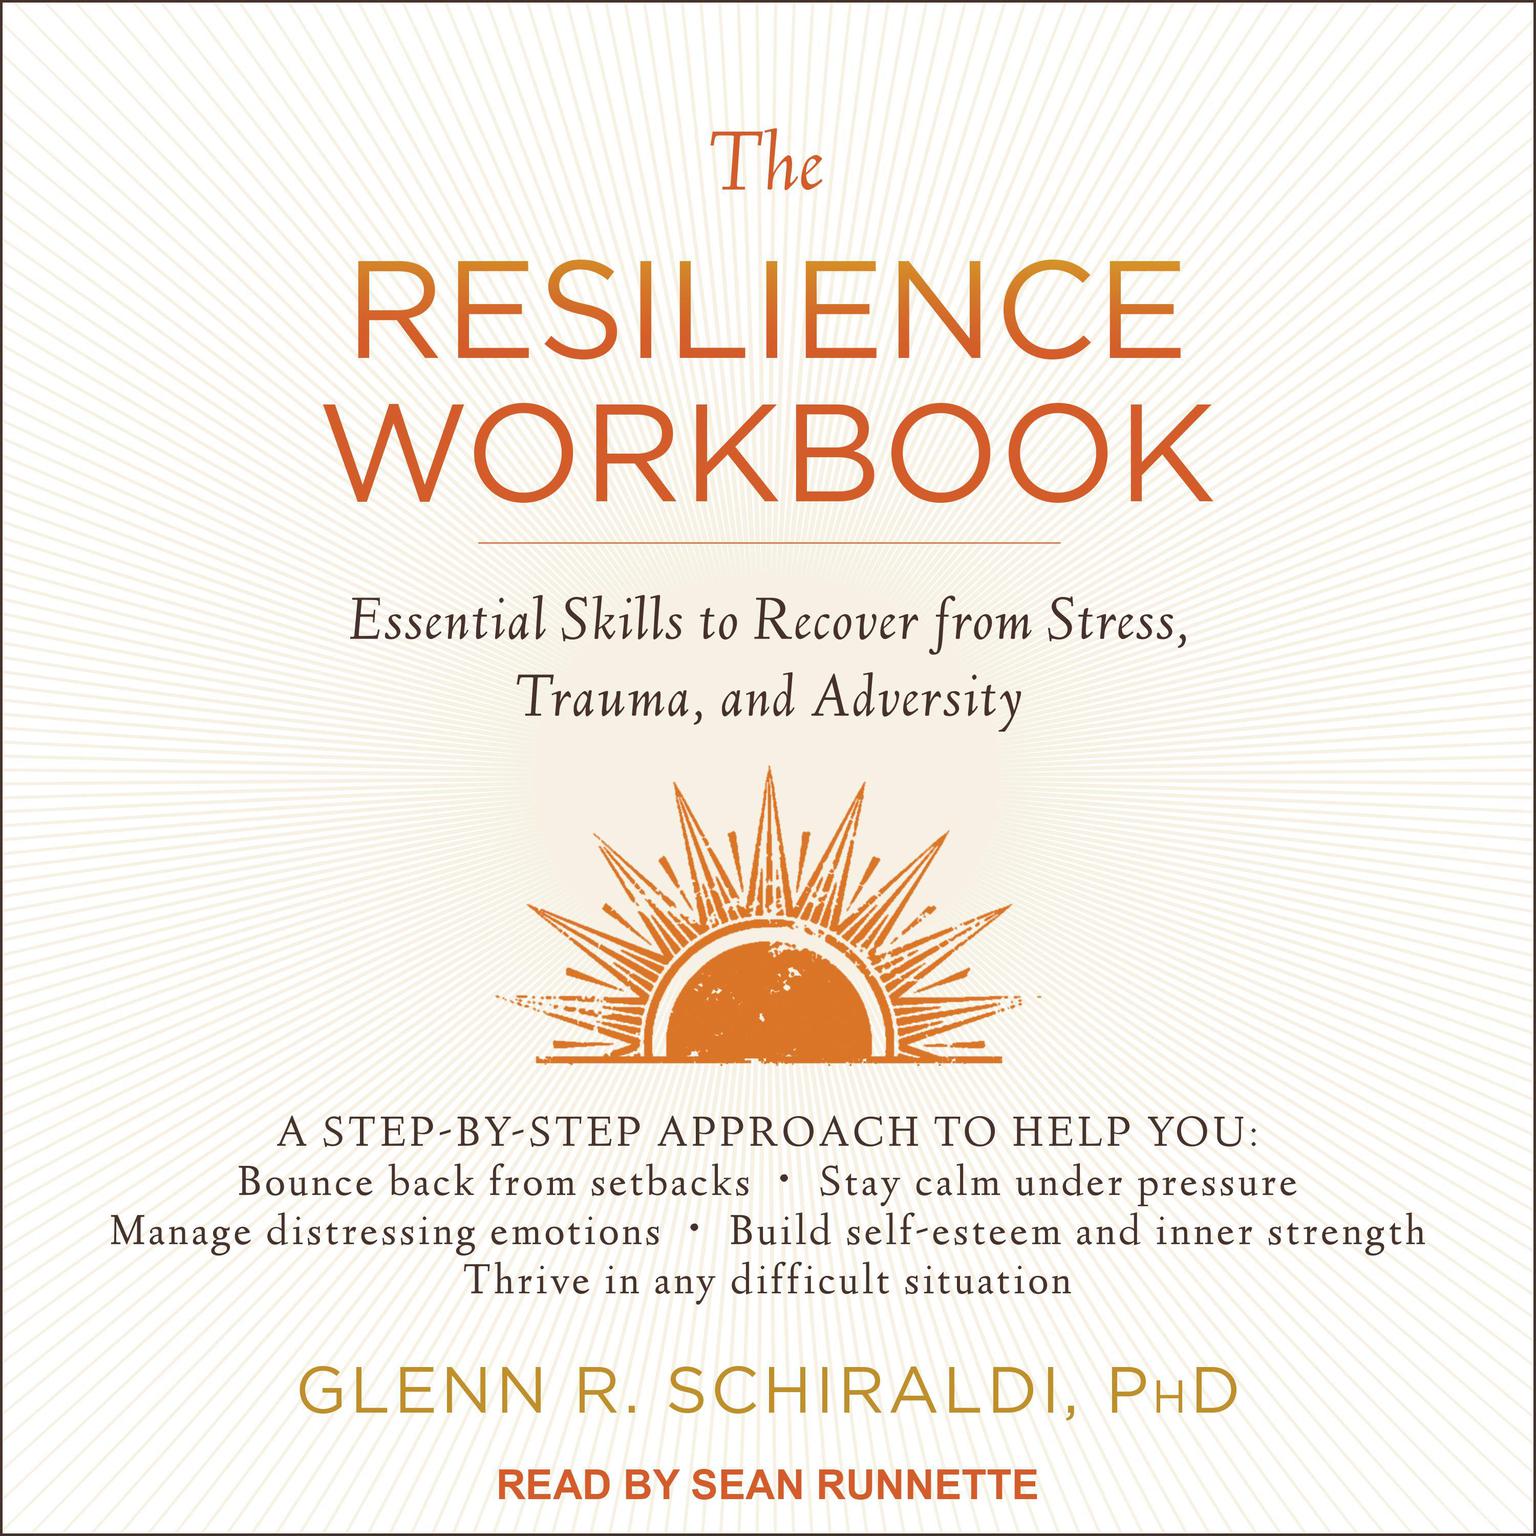 The Resilience Workbook: Essential Skills to Recover from Stress, Trauma, and Adversity Audiobook, by Glenn R. Schiraldi